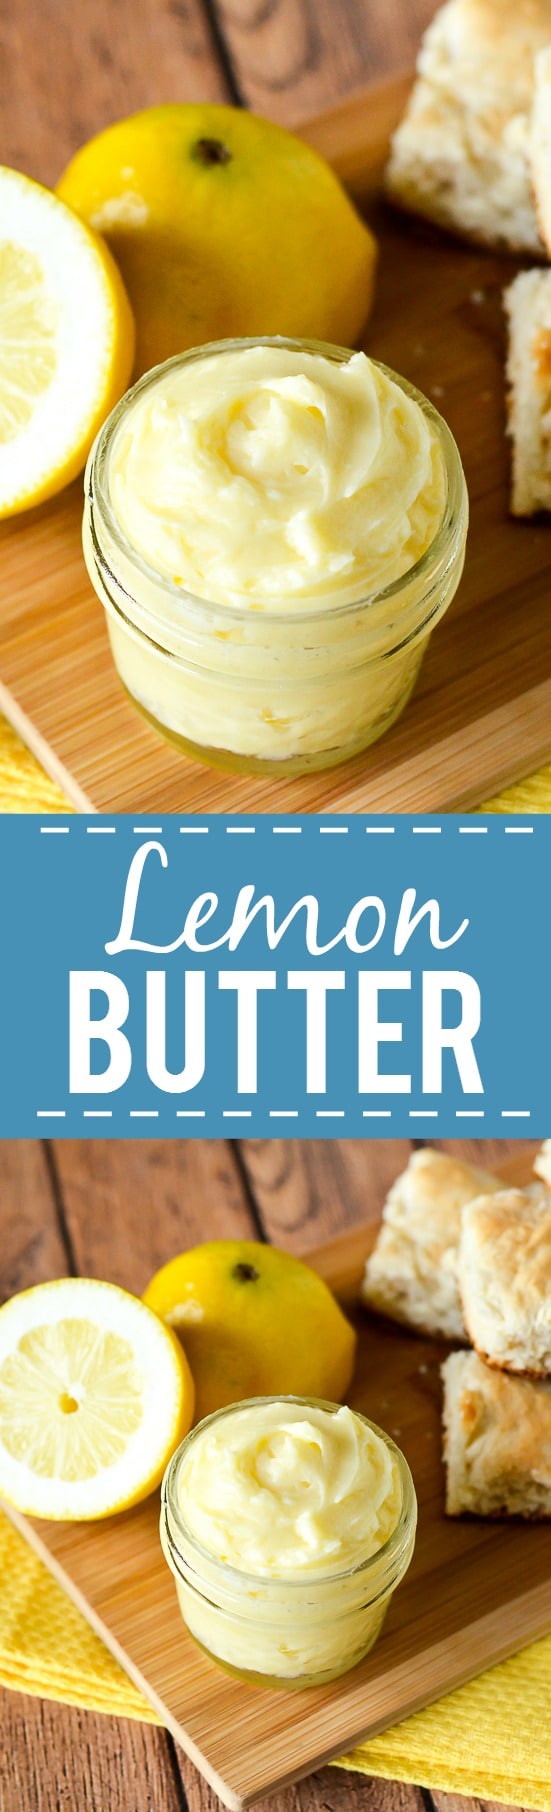 Lemon Butter Recipe - Sweet and tangy Lemon Butter goes perfectly on your favorite roll, biscuit, or scone for a refreshing and yummy treat. Make it in just 10 minutes with 5 ingredients! Easy compound butter recipe makes a great DIY gift idea too!!